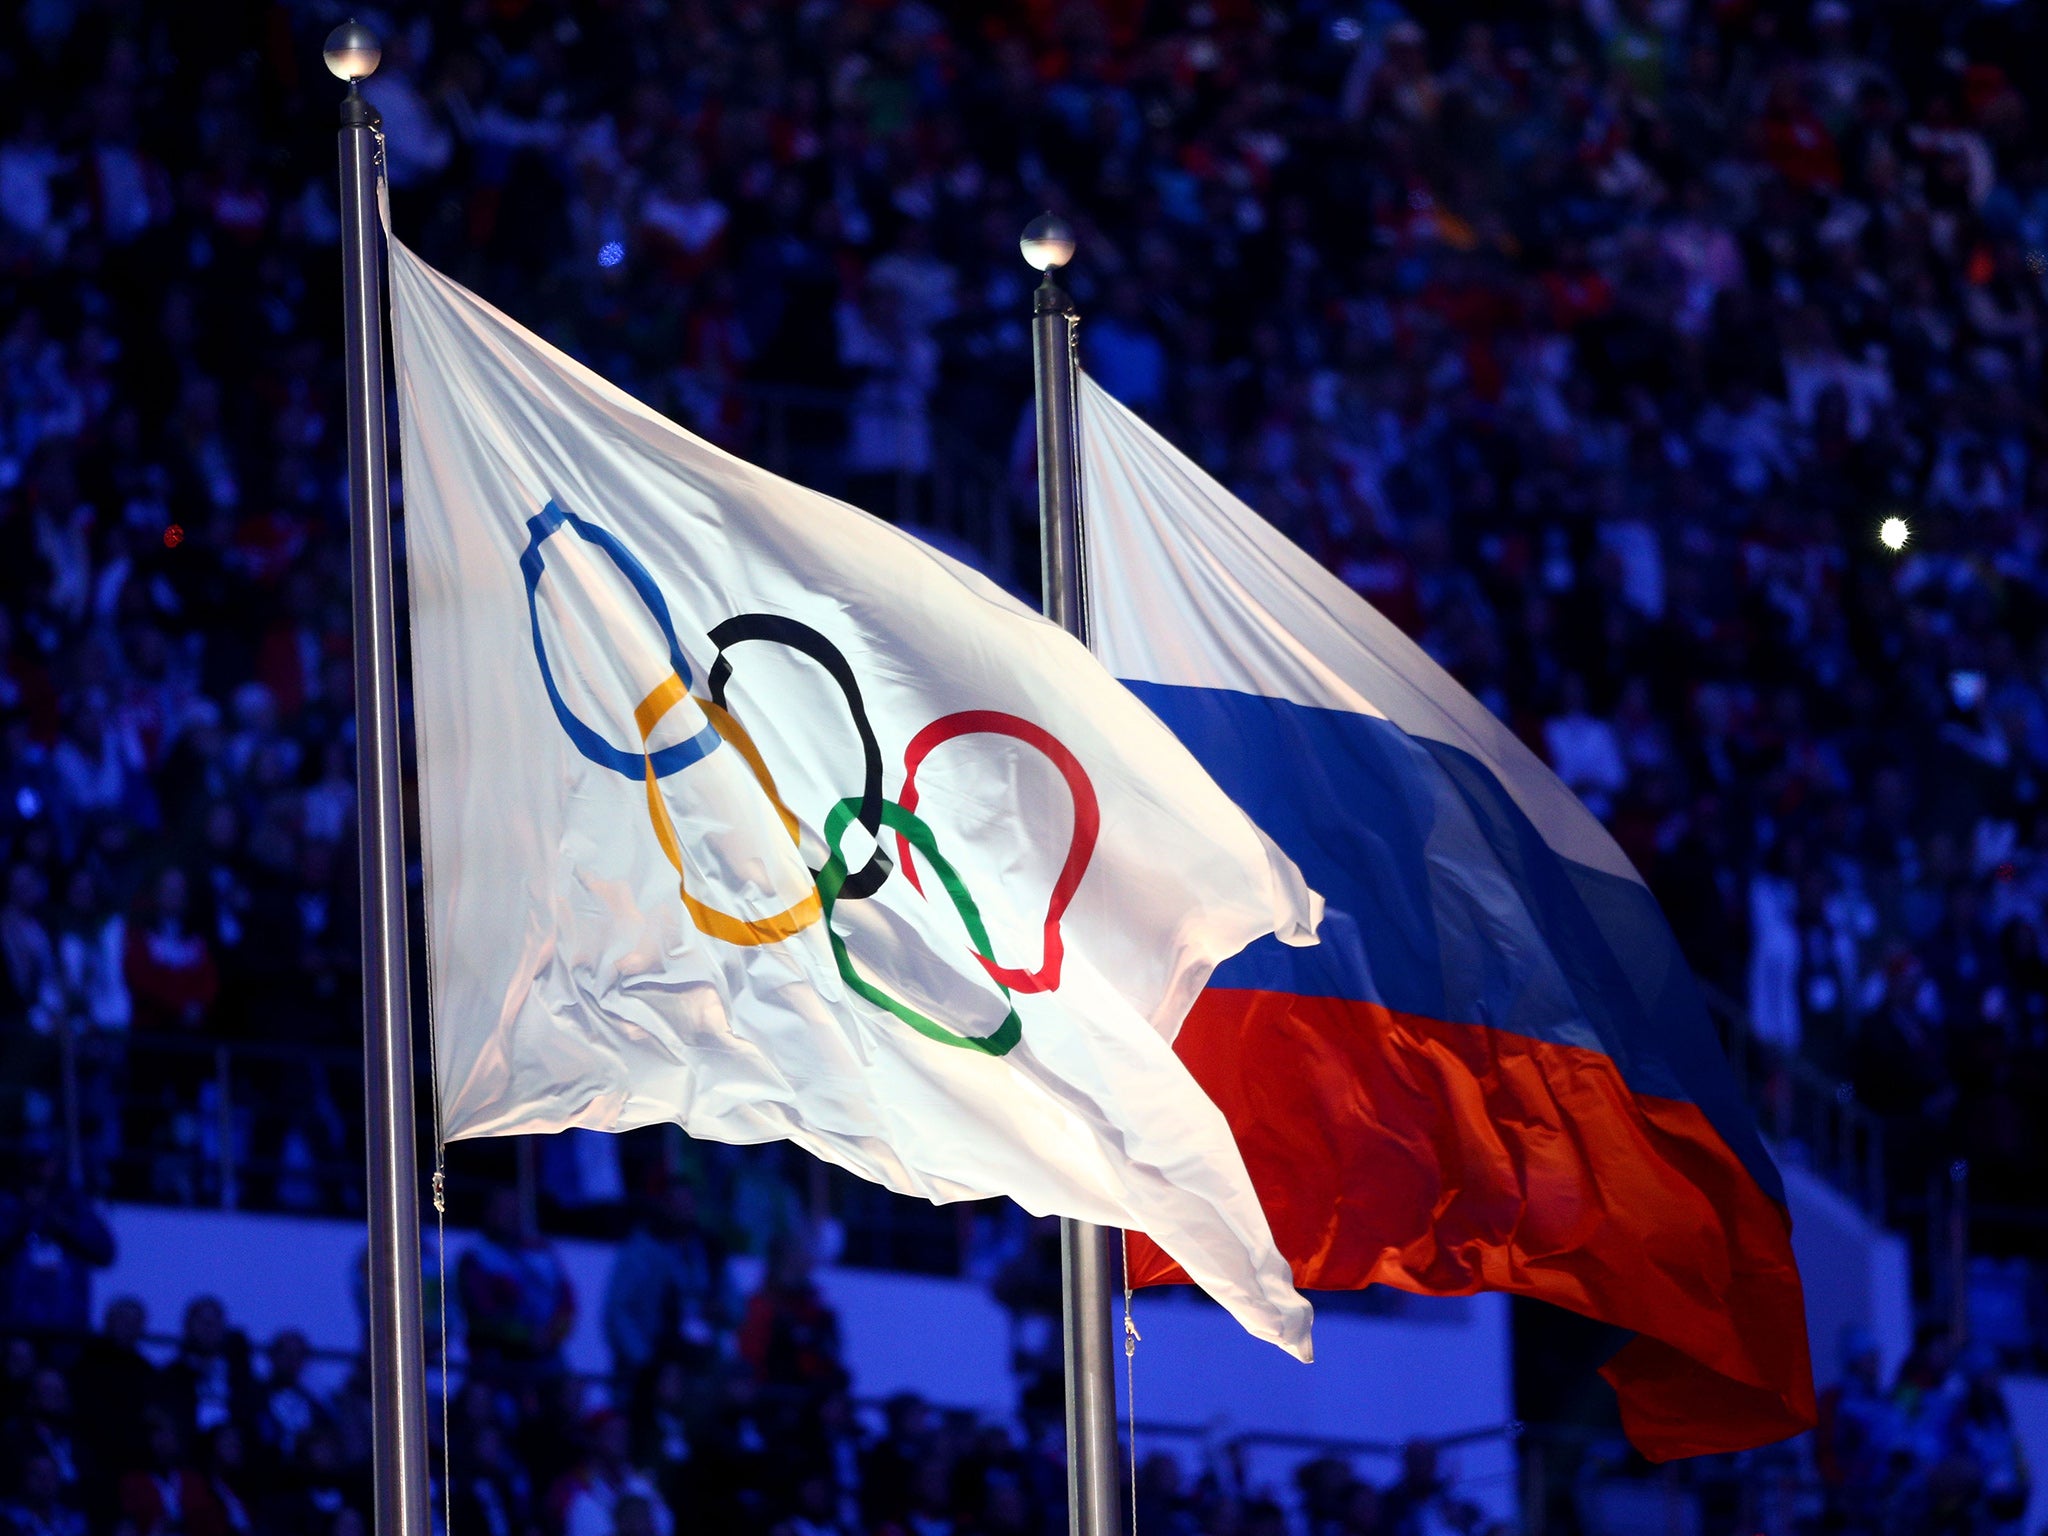 The Olympic and Russian flags flying at the closing ceremony of the 2014 Sochi Winter Olympics